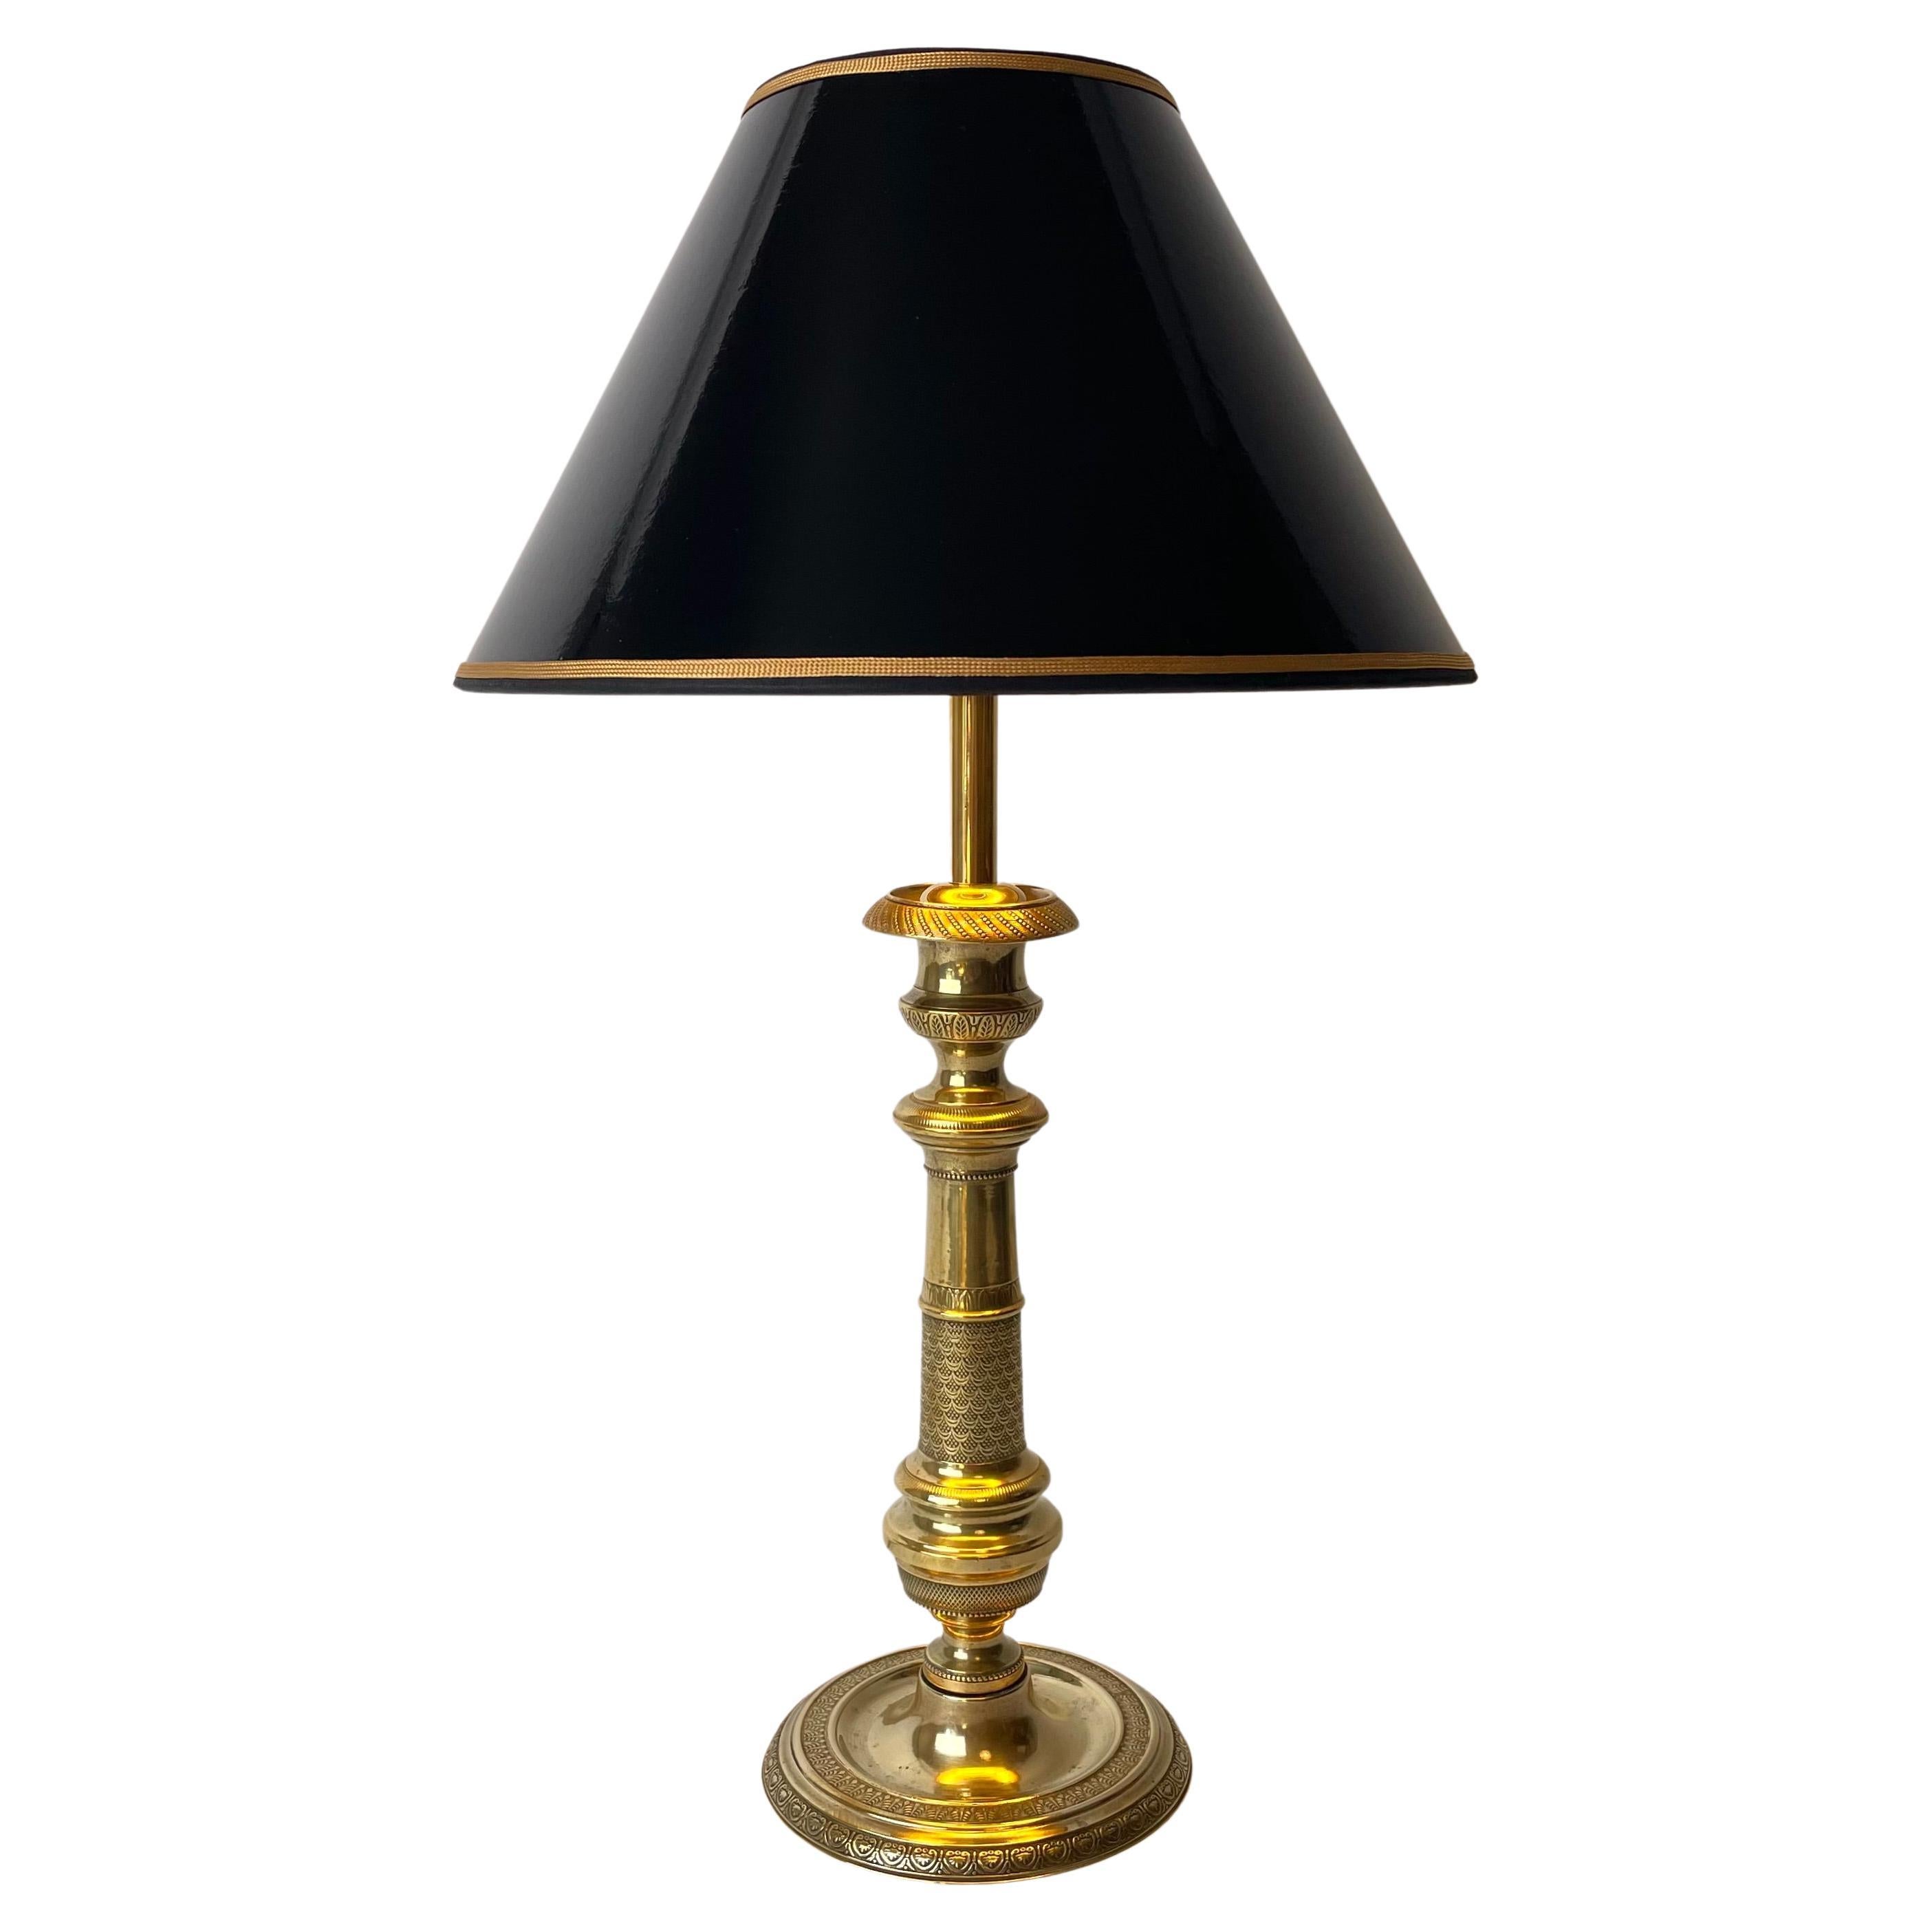 Table Lamp in Brass. Made in France during the 1820s, converted into a table lamp during the 20th century. 
Base decorated with two different types of palmette patterns. Column decorated with finely ornamented diagonally checkered pattern as well as